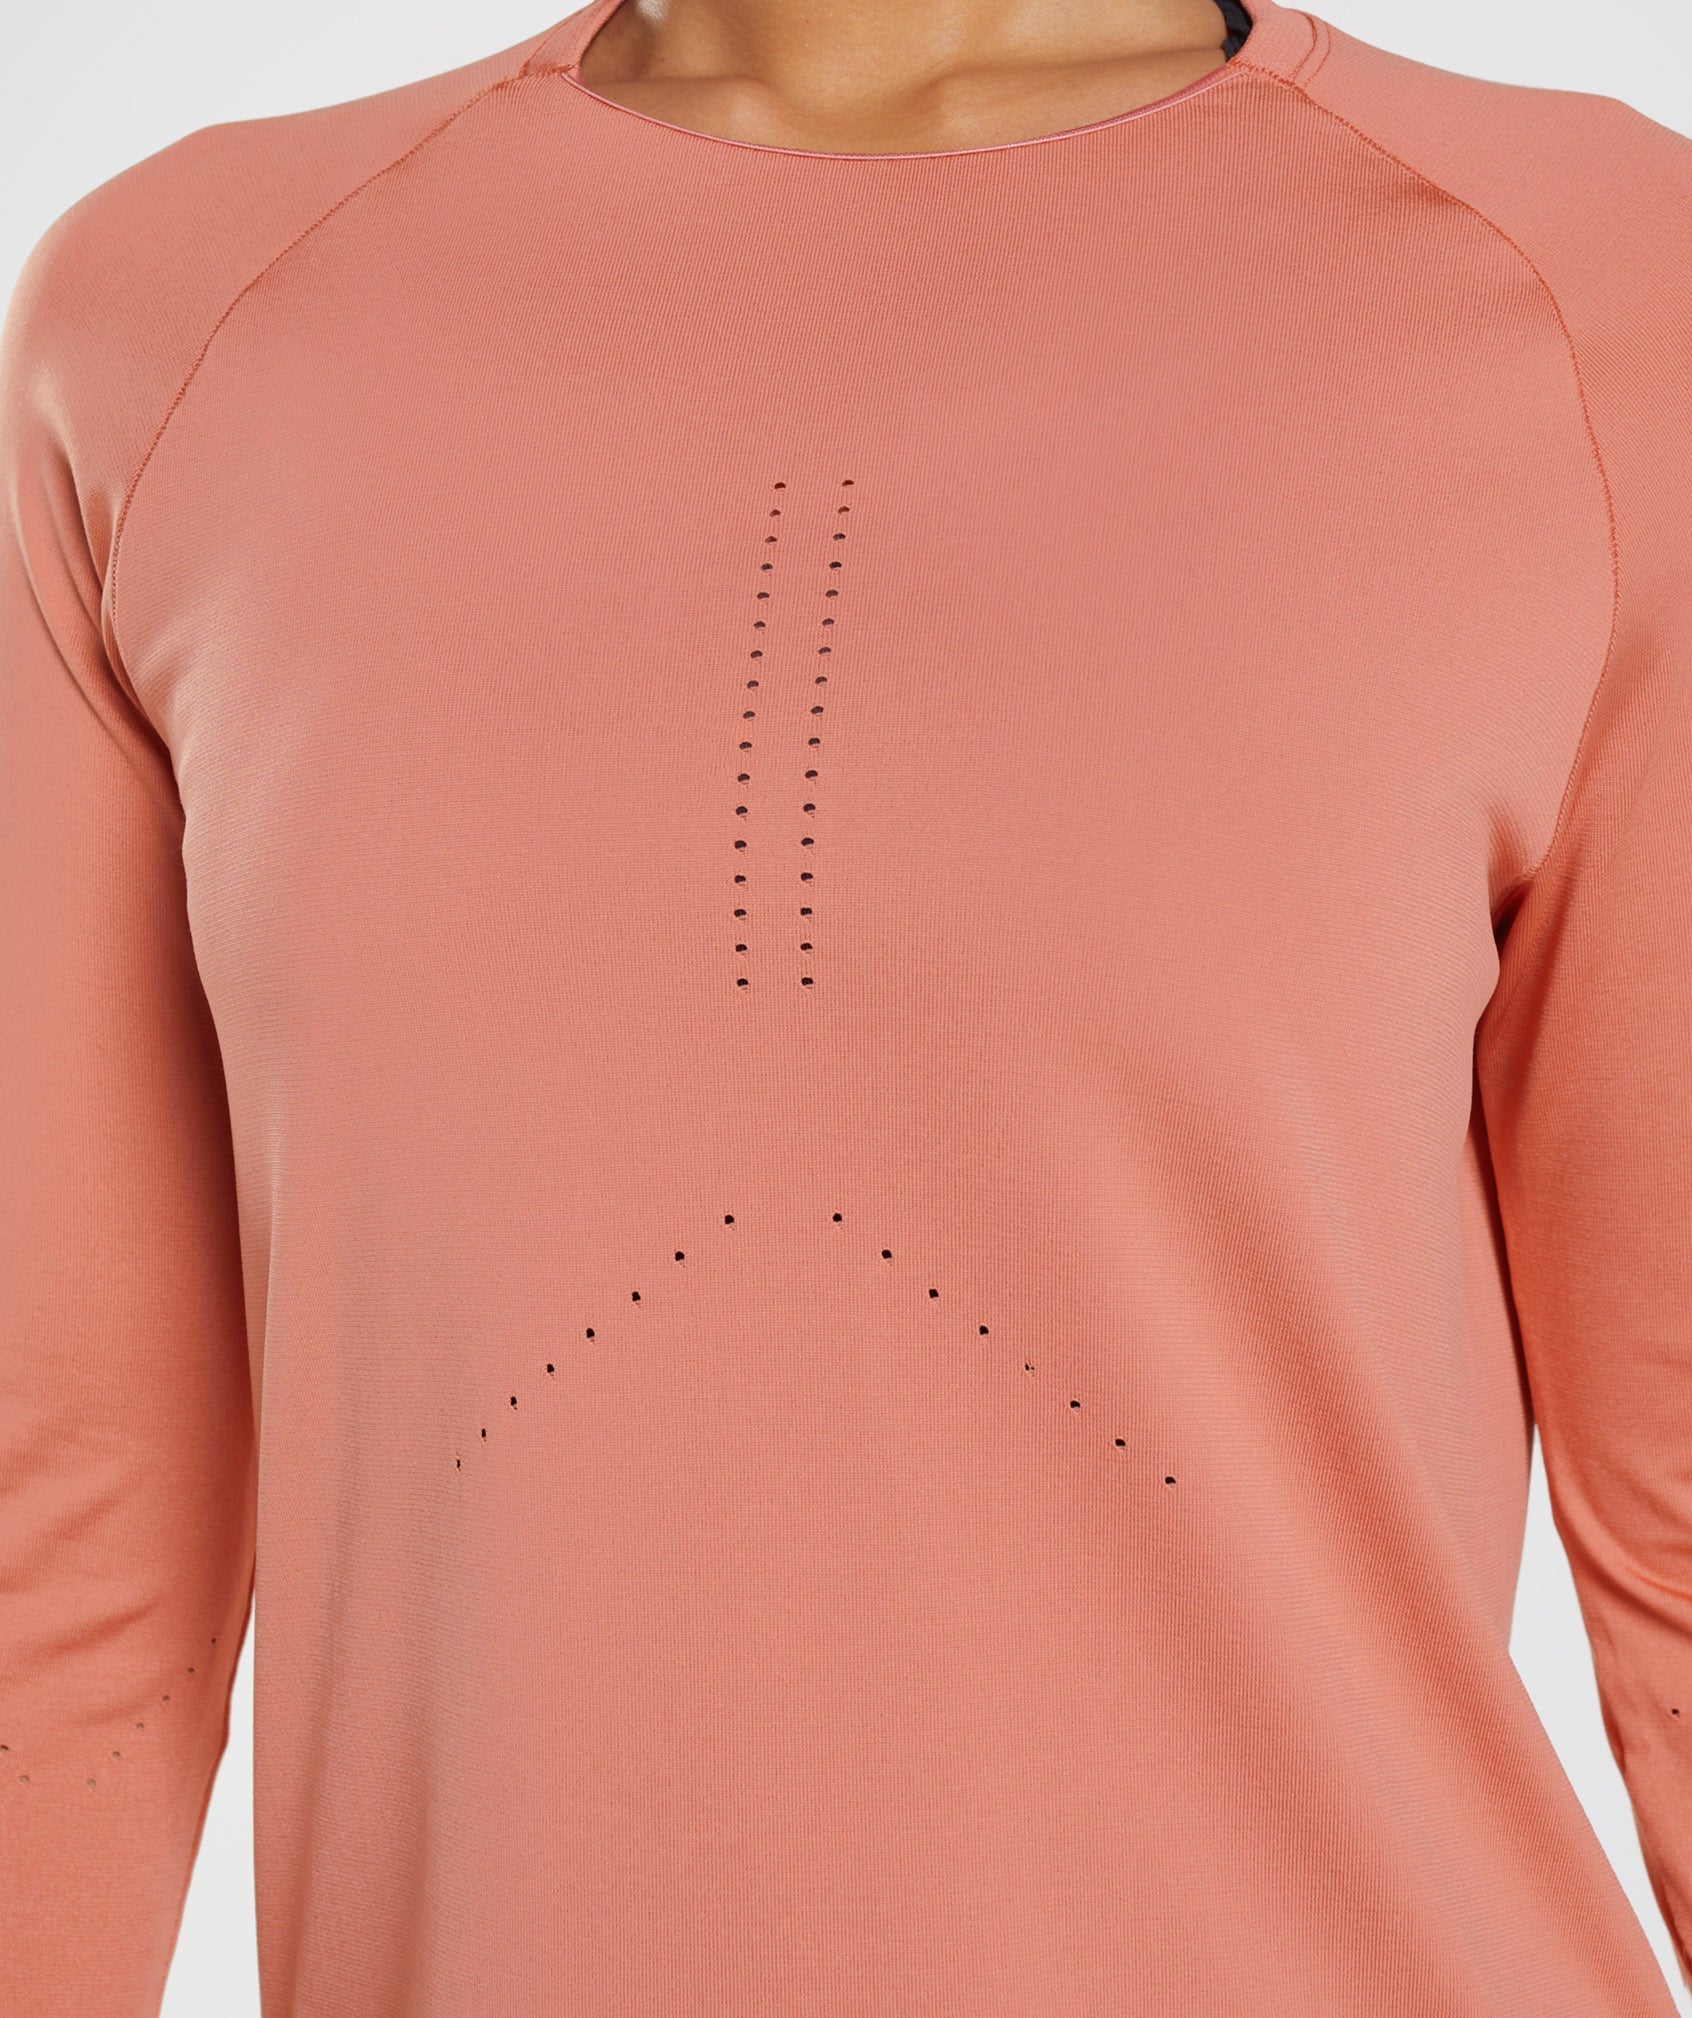 Sweat Seamless Long Sleeve Top in Terracotta Pink - view 4